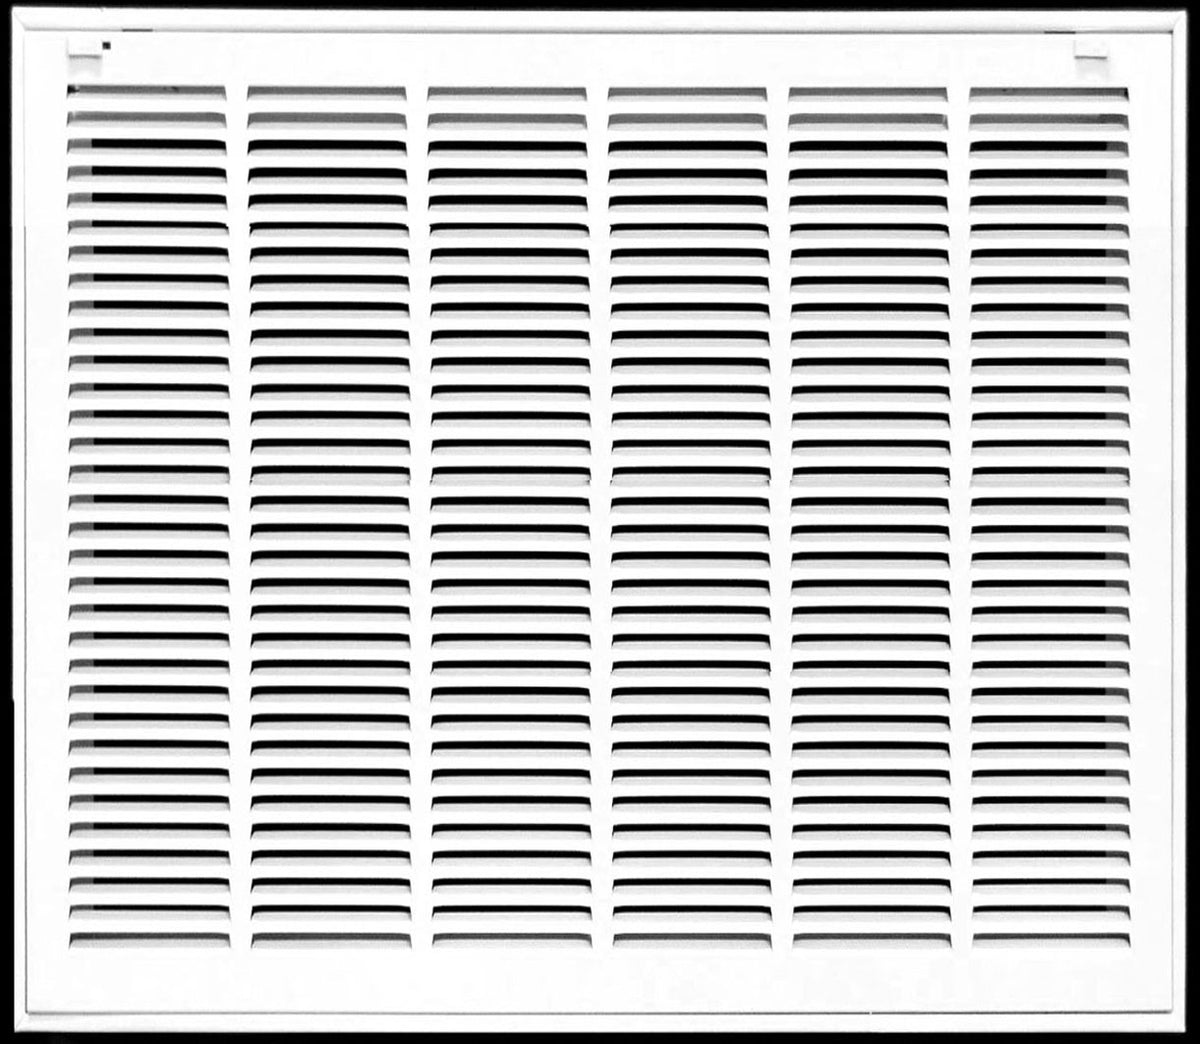 28&quot; X 28&quot; Steel Return Air Filter Grille for 1&quot; Filter - Removable Frame - [Outer Dimensions: 30 5/8&quot; X 30 5/8&quot;]